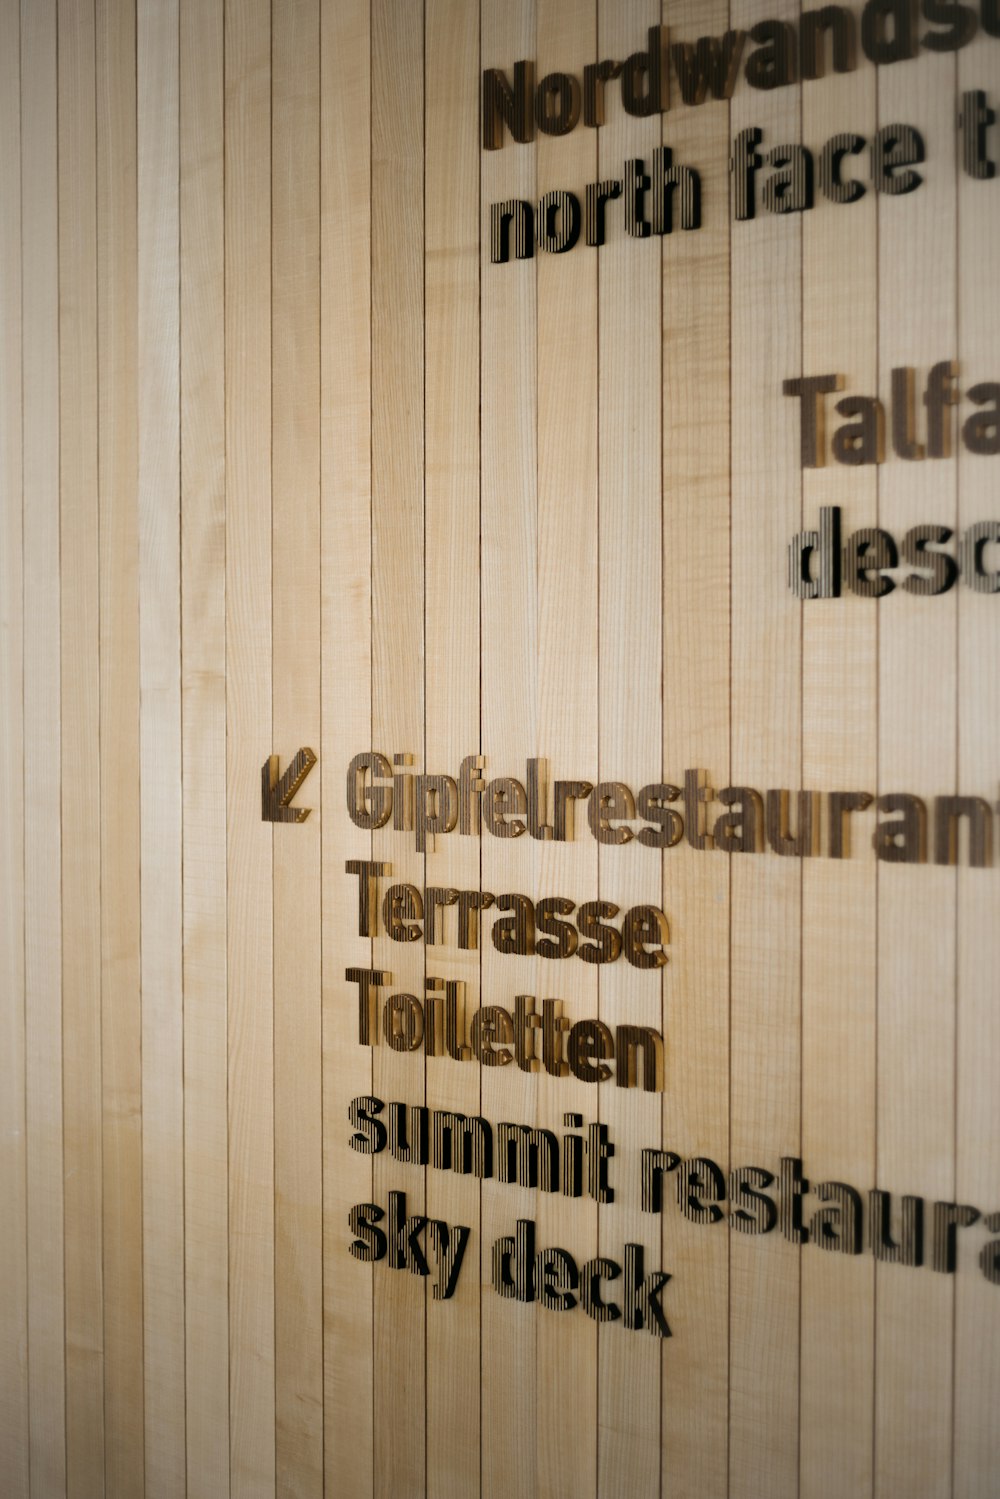 a wooden wall with words written on it